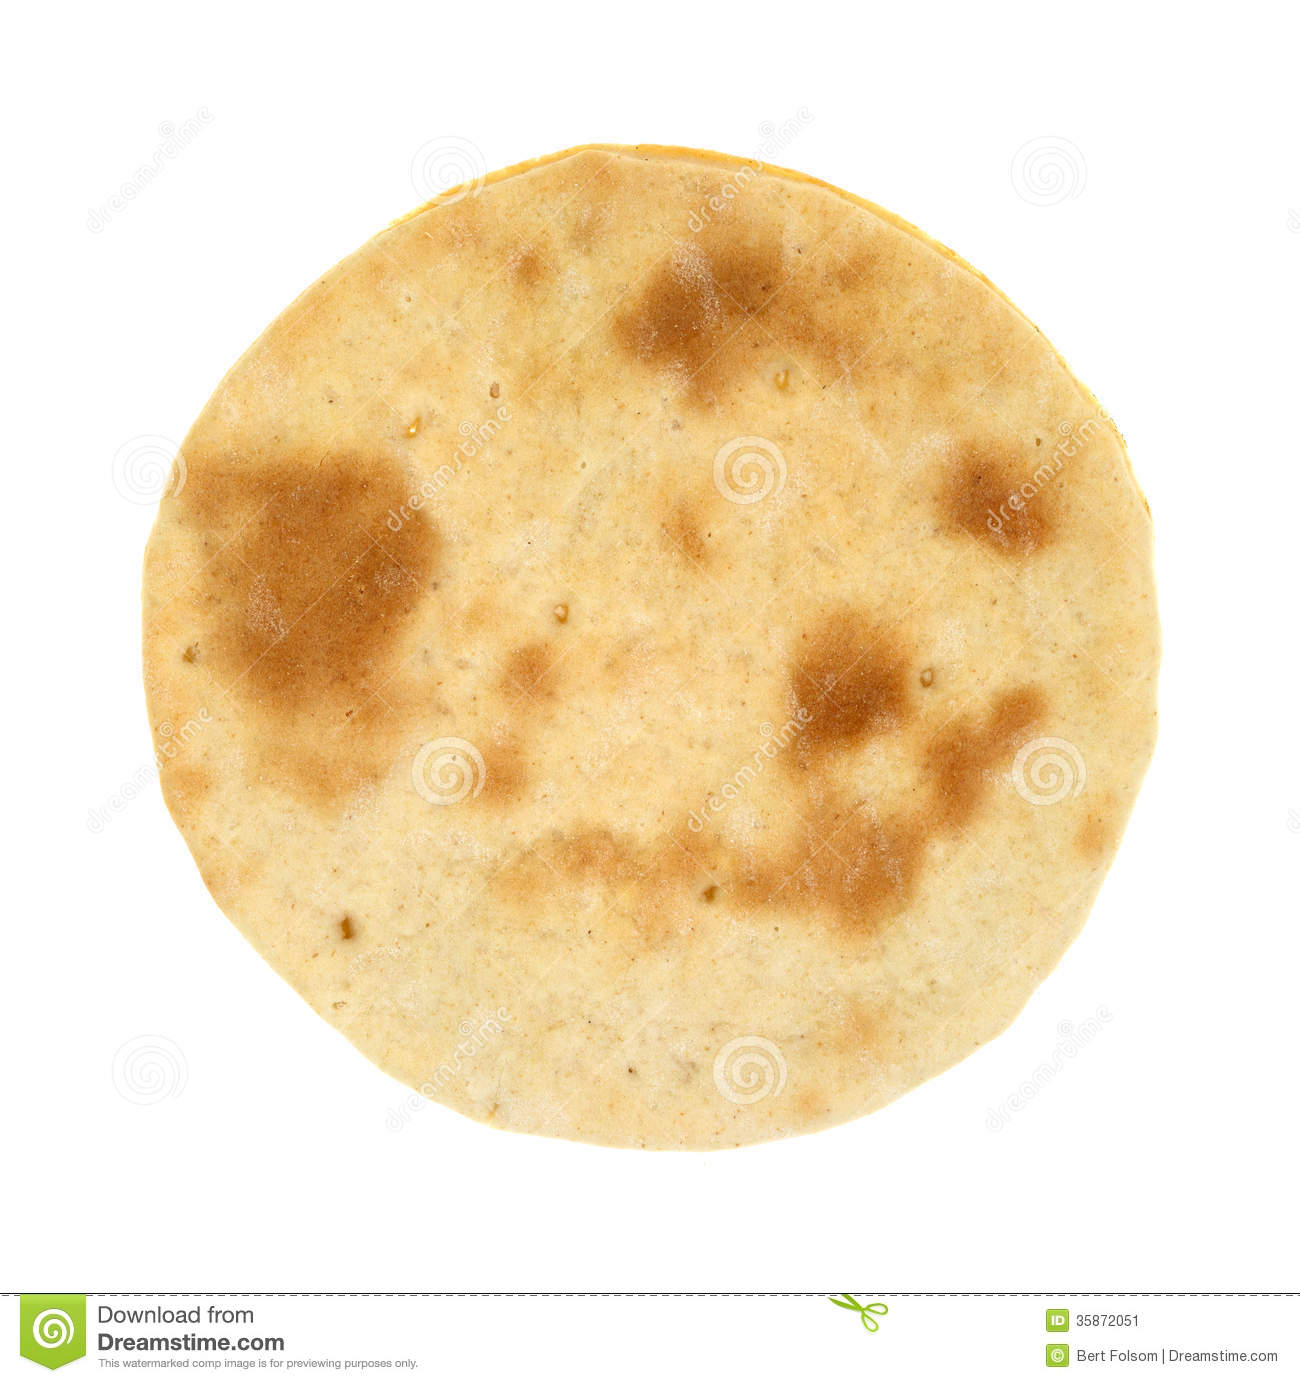 Small Cooked Pizza Crust Stock Image   Image  35872051